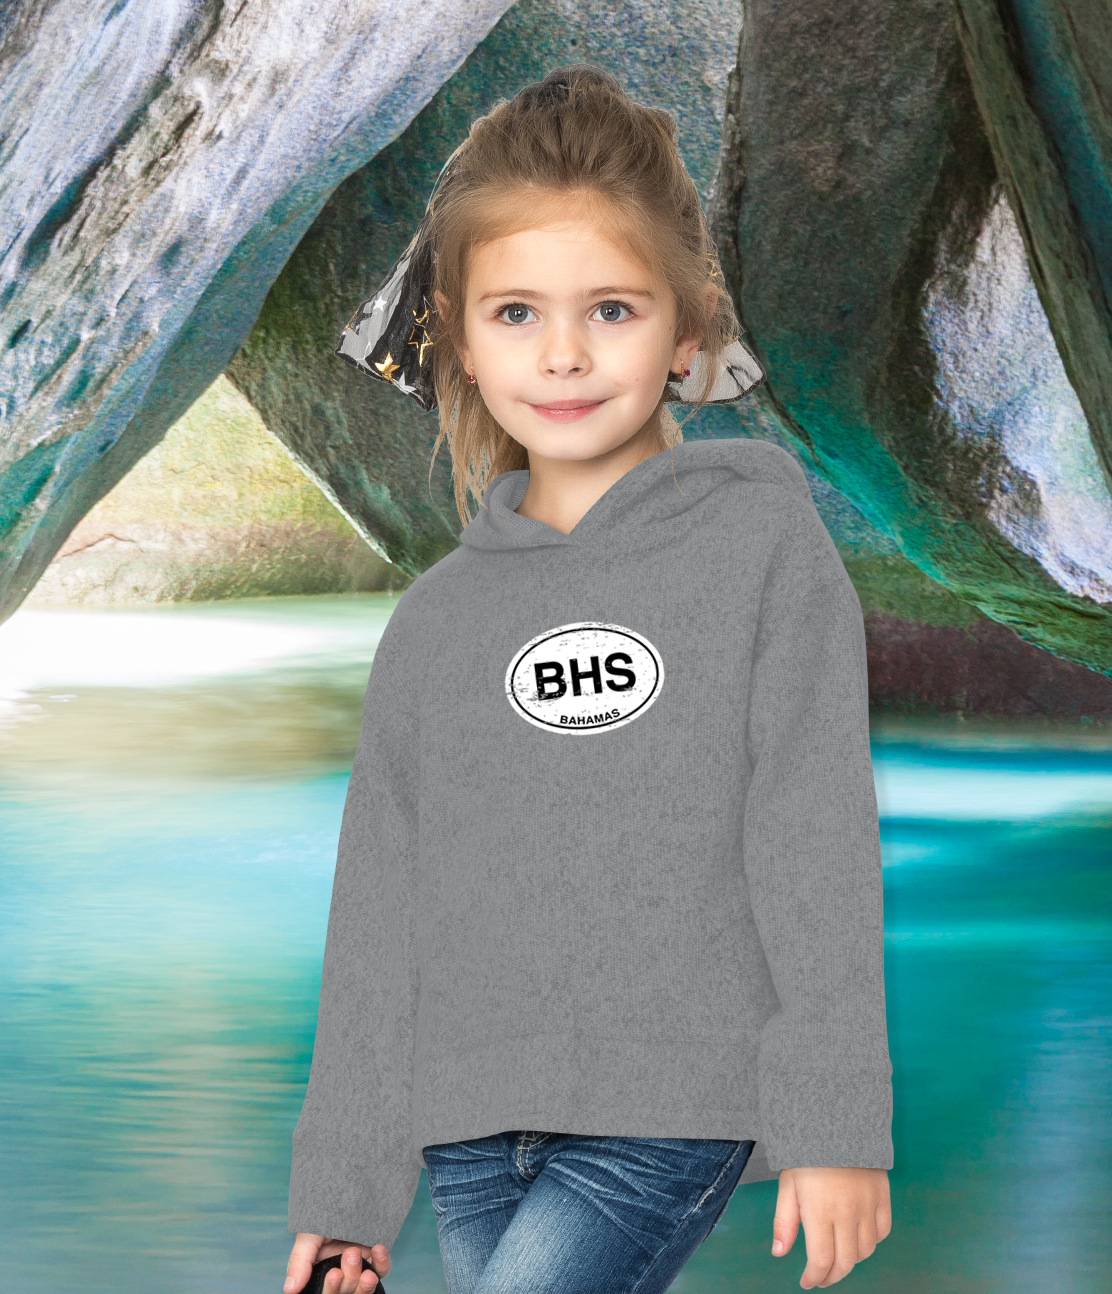 Bahamas Classic Youth Hoodie - My Destination Location